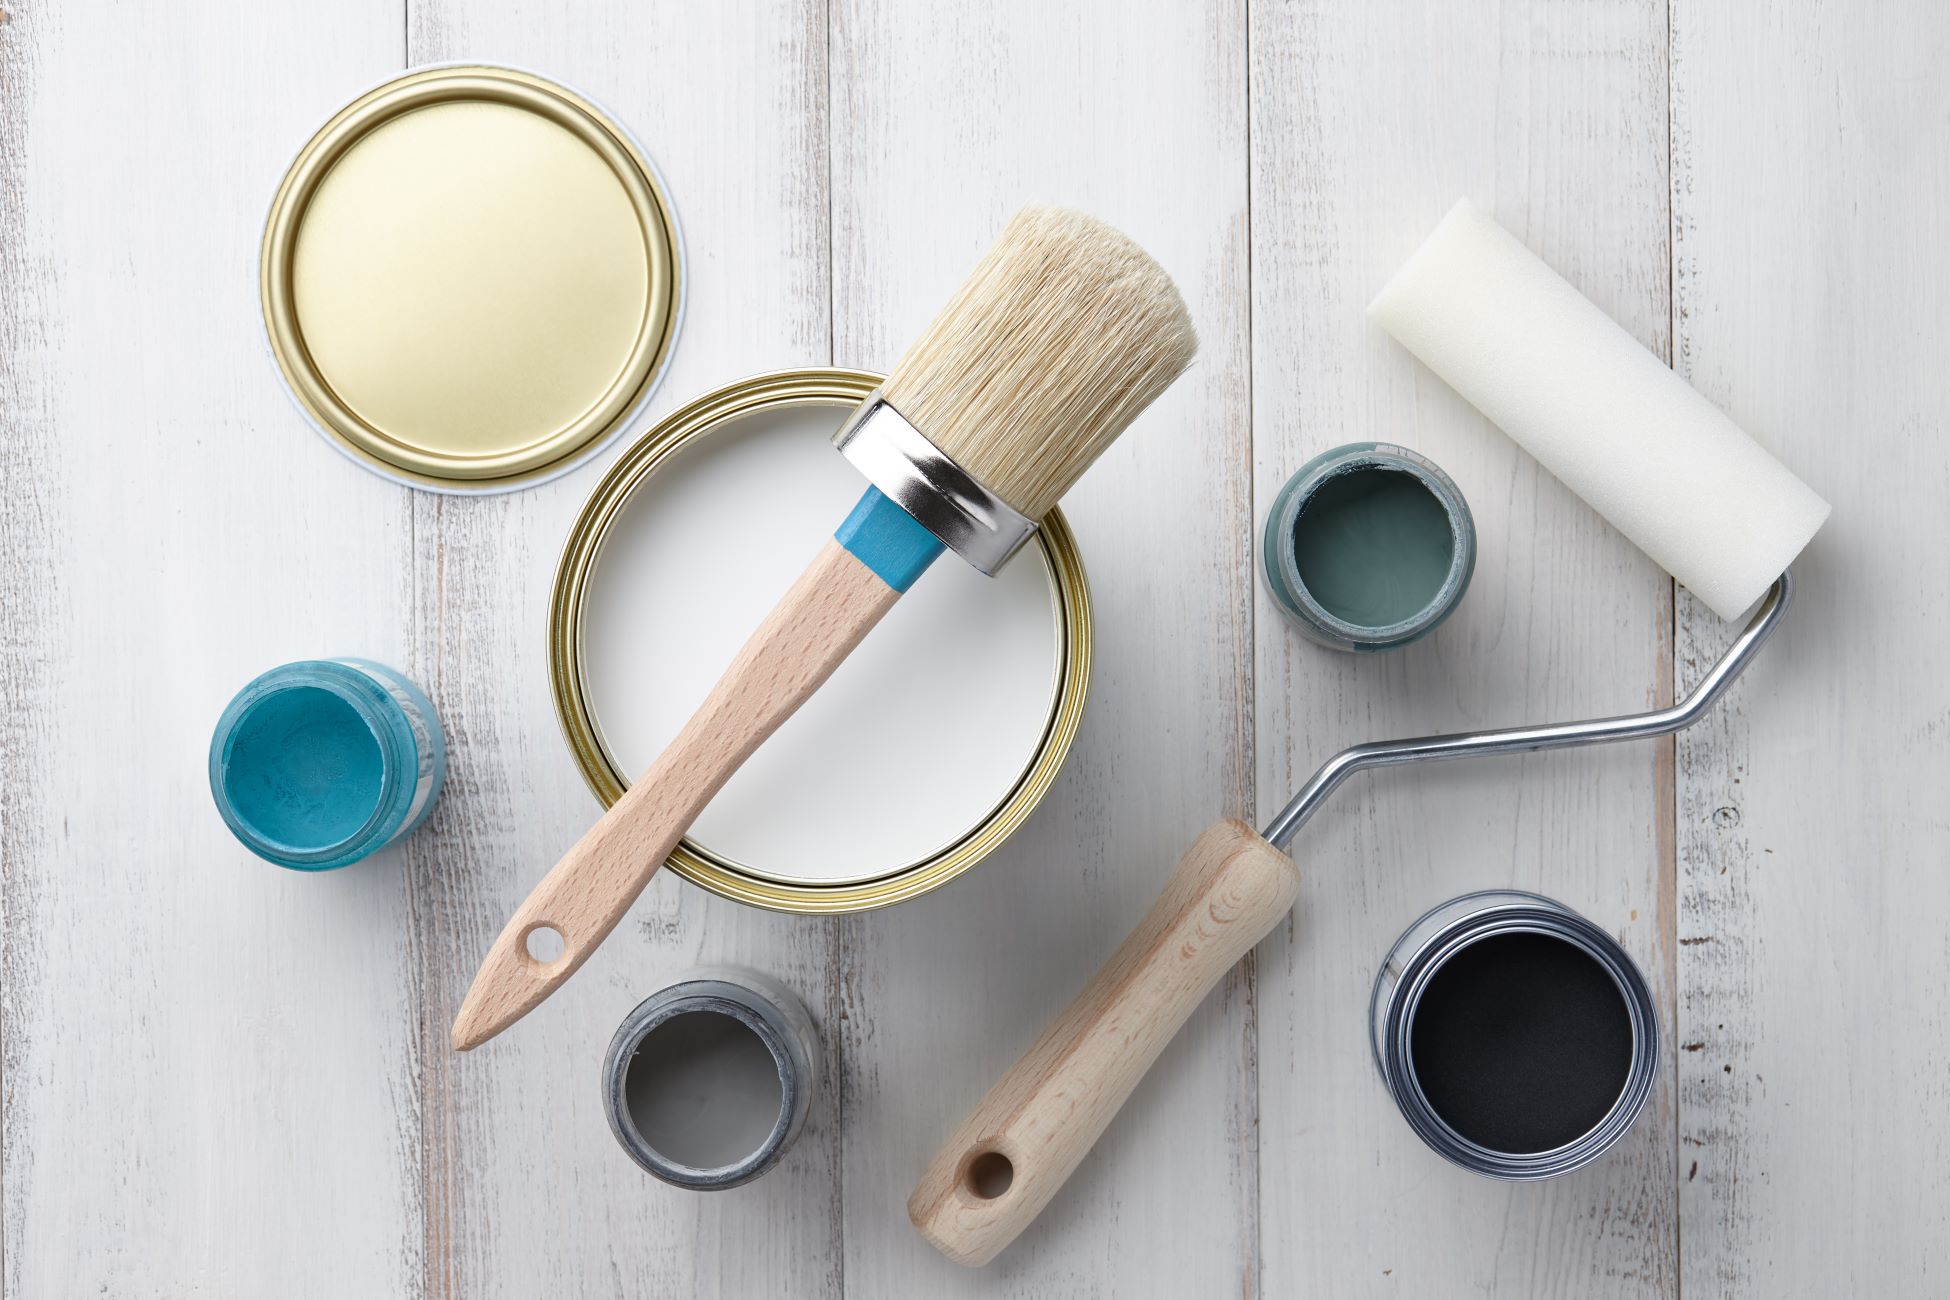 What Kind Of Paint Is Used For DIY Projects